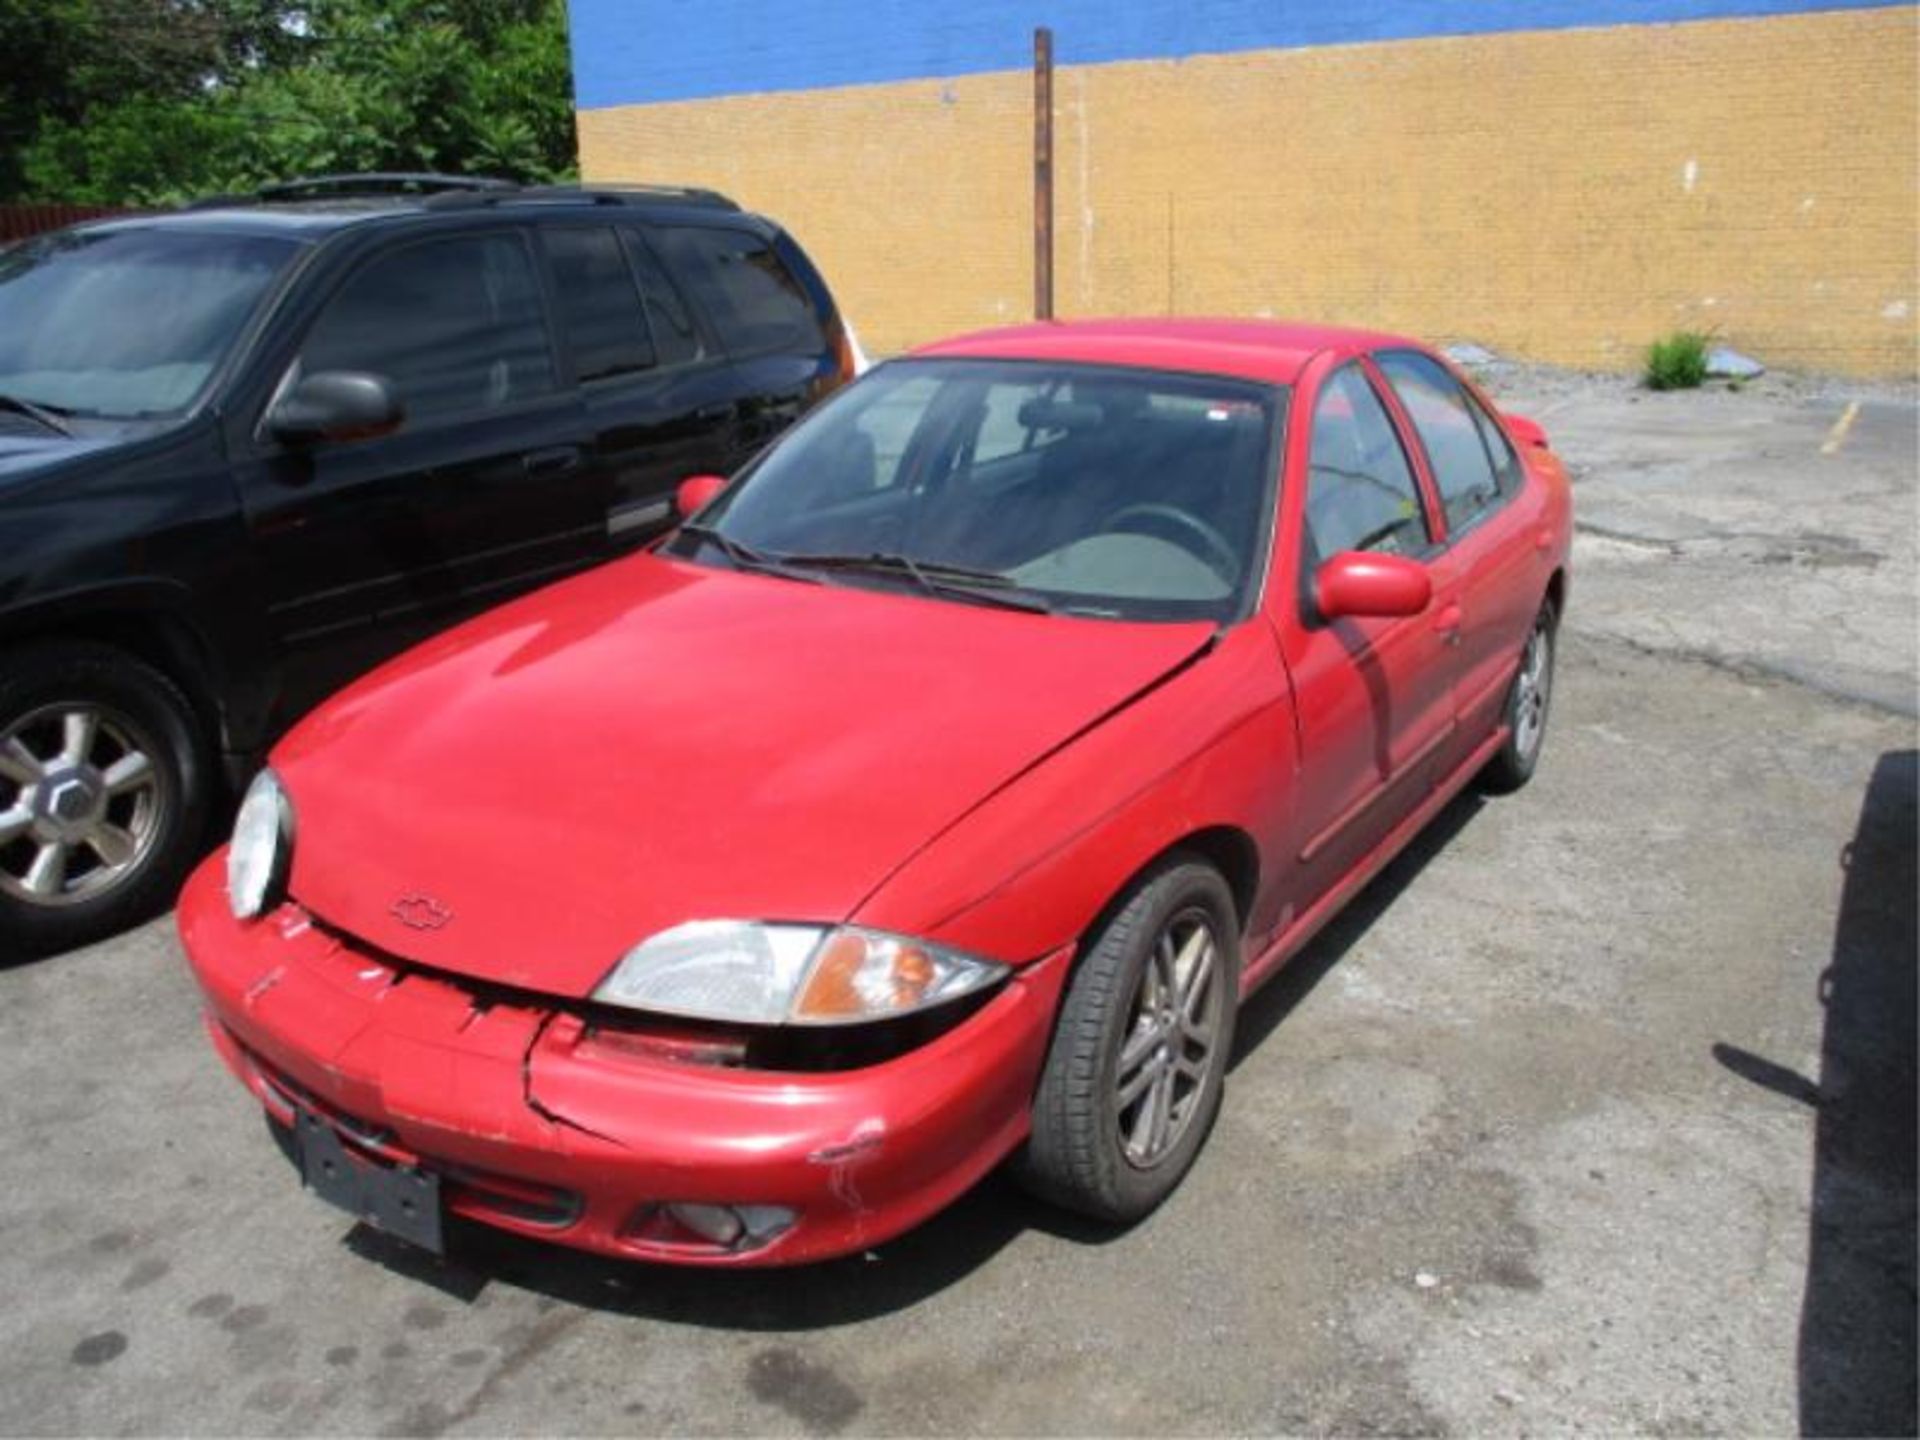 2002 Red Chevy Cavalier VIN:1G1JH52F227344735